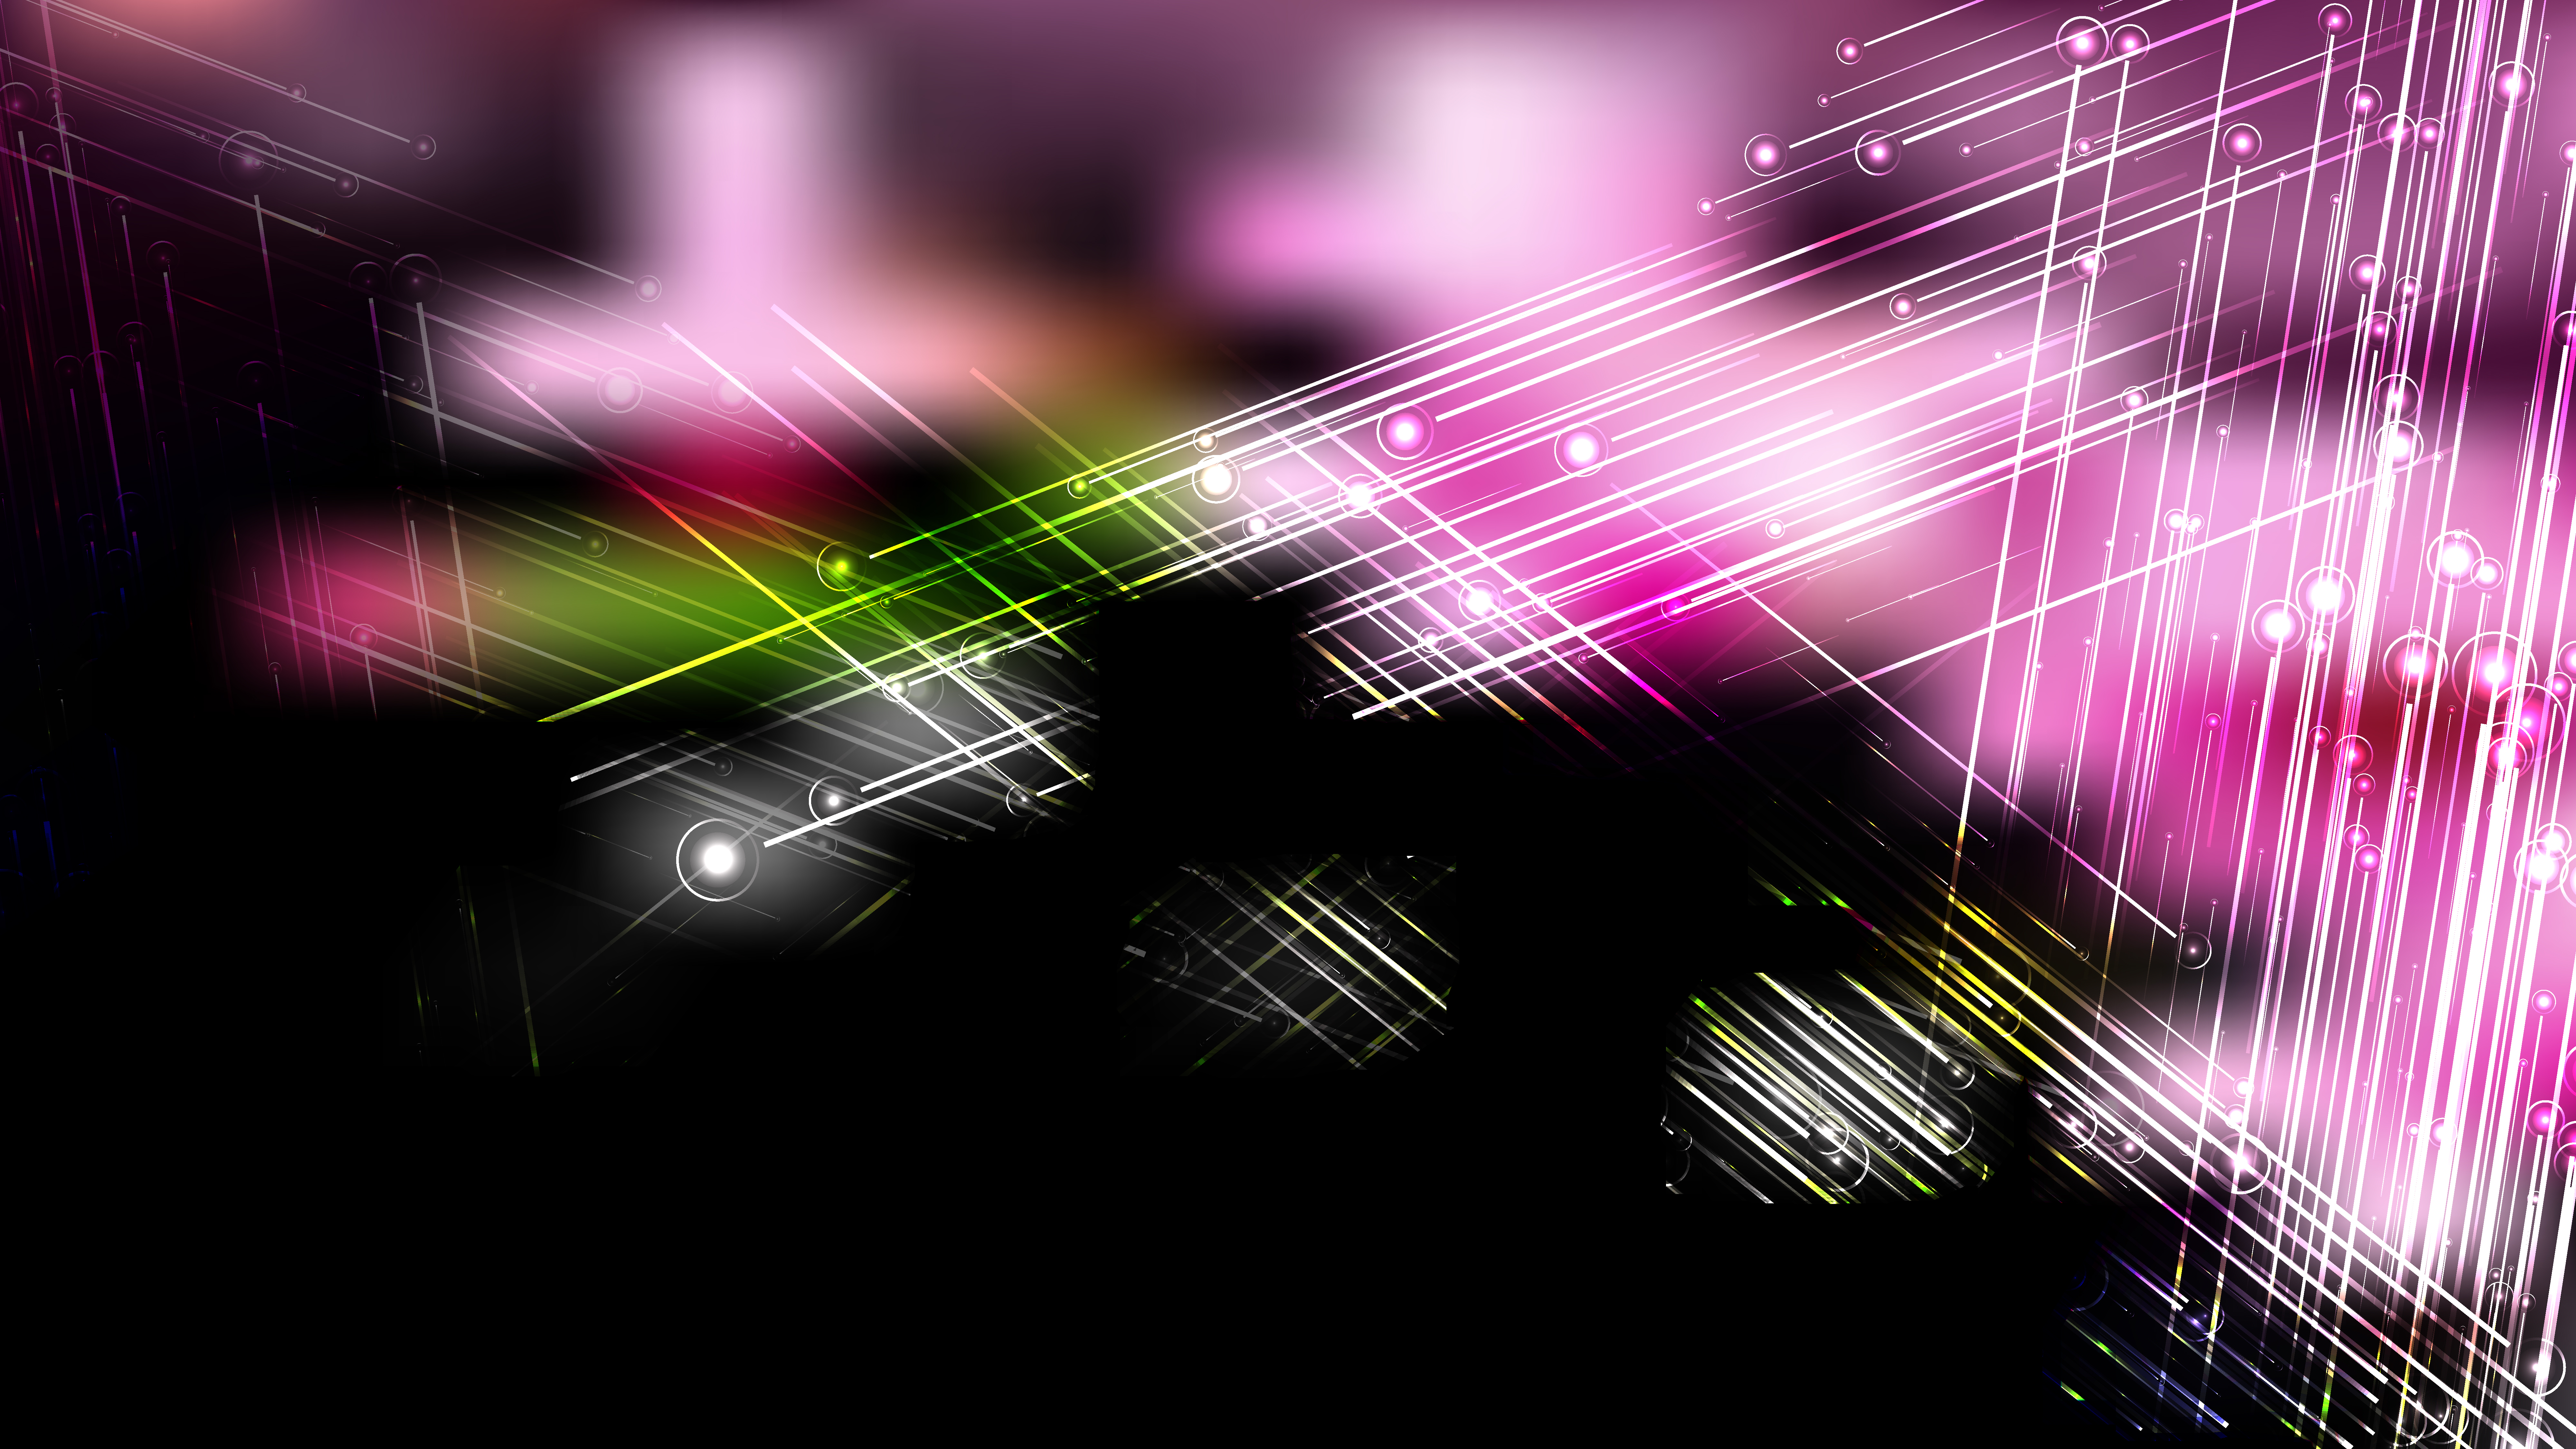 Shiny,Pink,Black,And,White,Crossing,Lines,Background,Illustrator